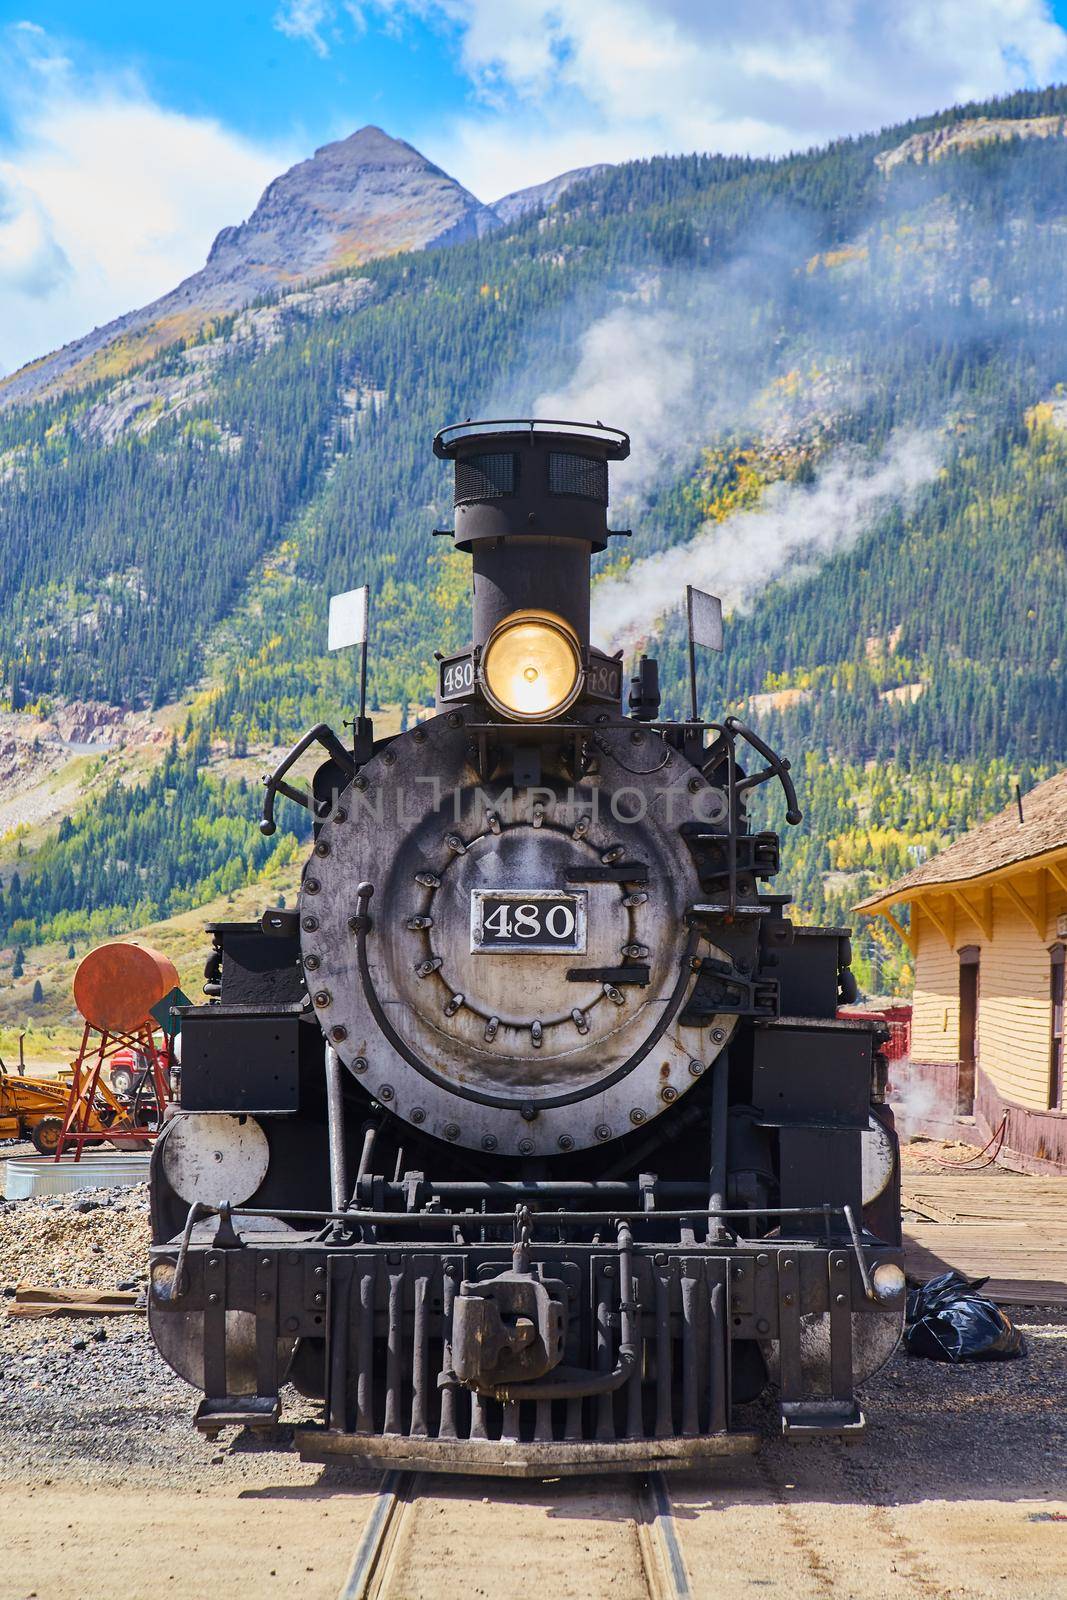 Image of Vertical close-up front of locomotive train with wall of mountains in the background